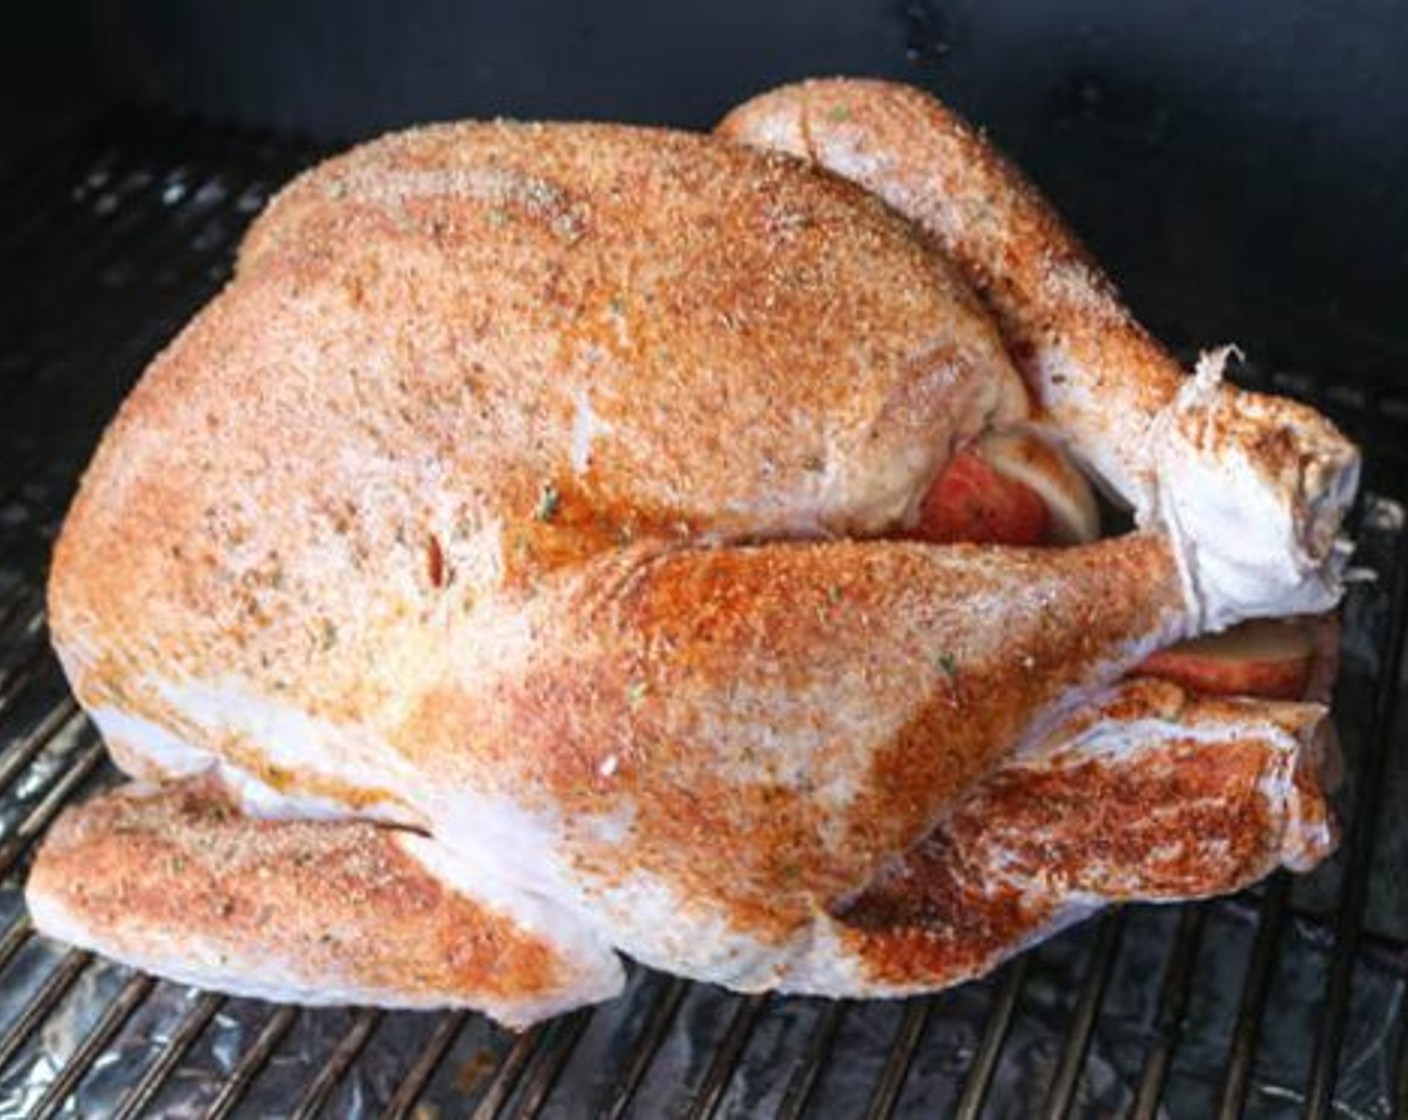 step 12 Smoke the turkey for 3 ½ hours spraying the skin with additional cooking spray as necessary. Remove the turkey from the smoker when internal temperature reaches 165 degrees F (73 degrees C) in the breast and 175 degrees F (79 degrees C) in the thigh.